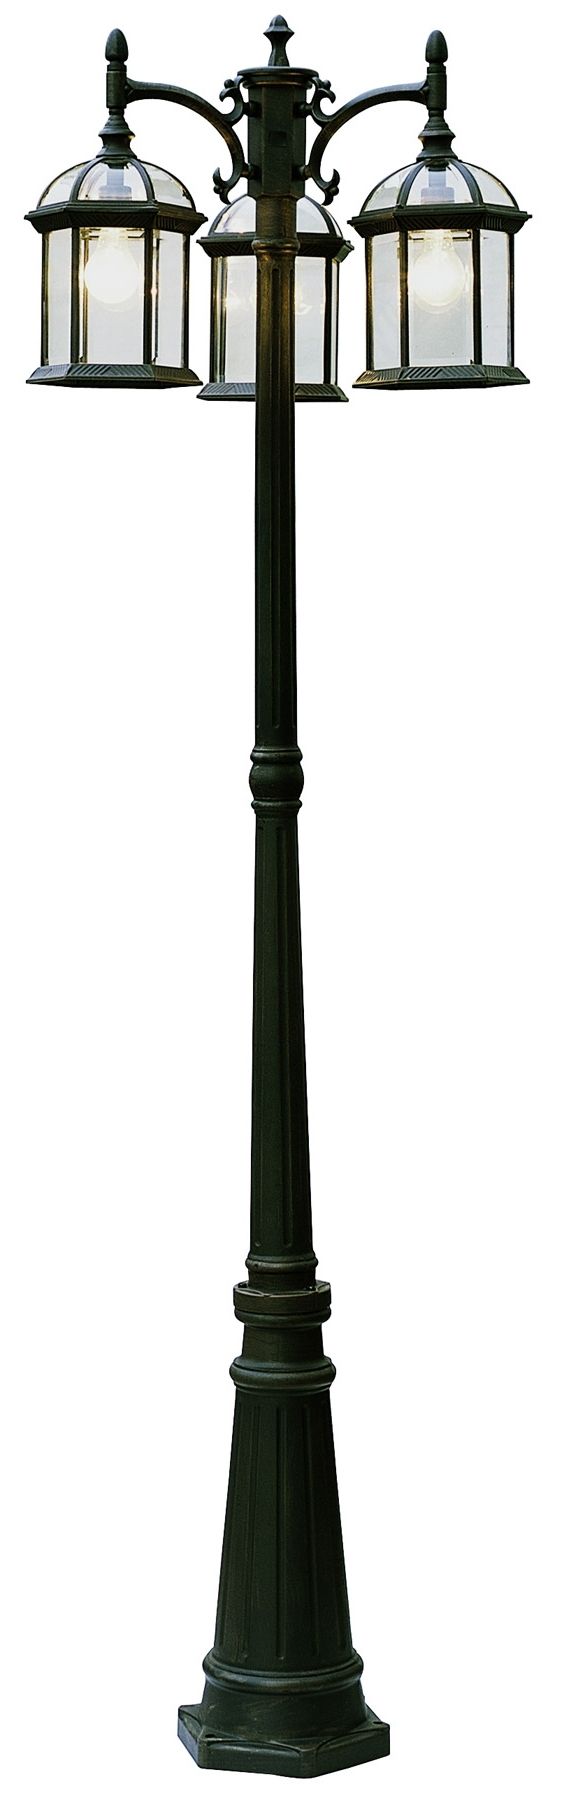 Light Post Outdoor – Outdoor Lighting Intended For Most Current Outdoor Lanterns On Post (View 7 of 20)